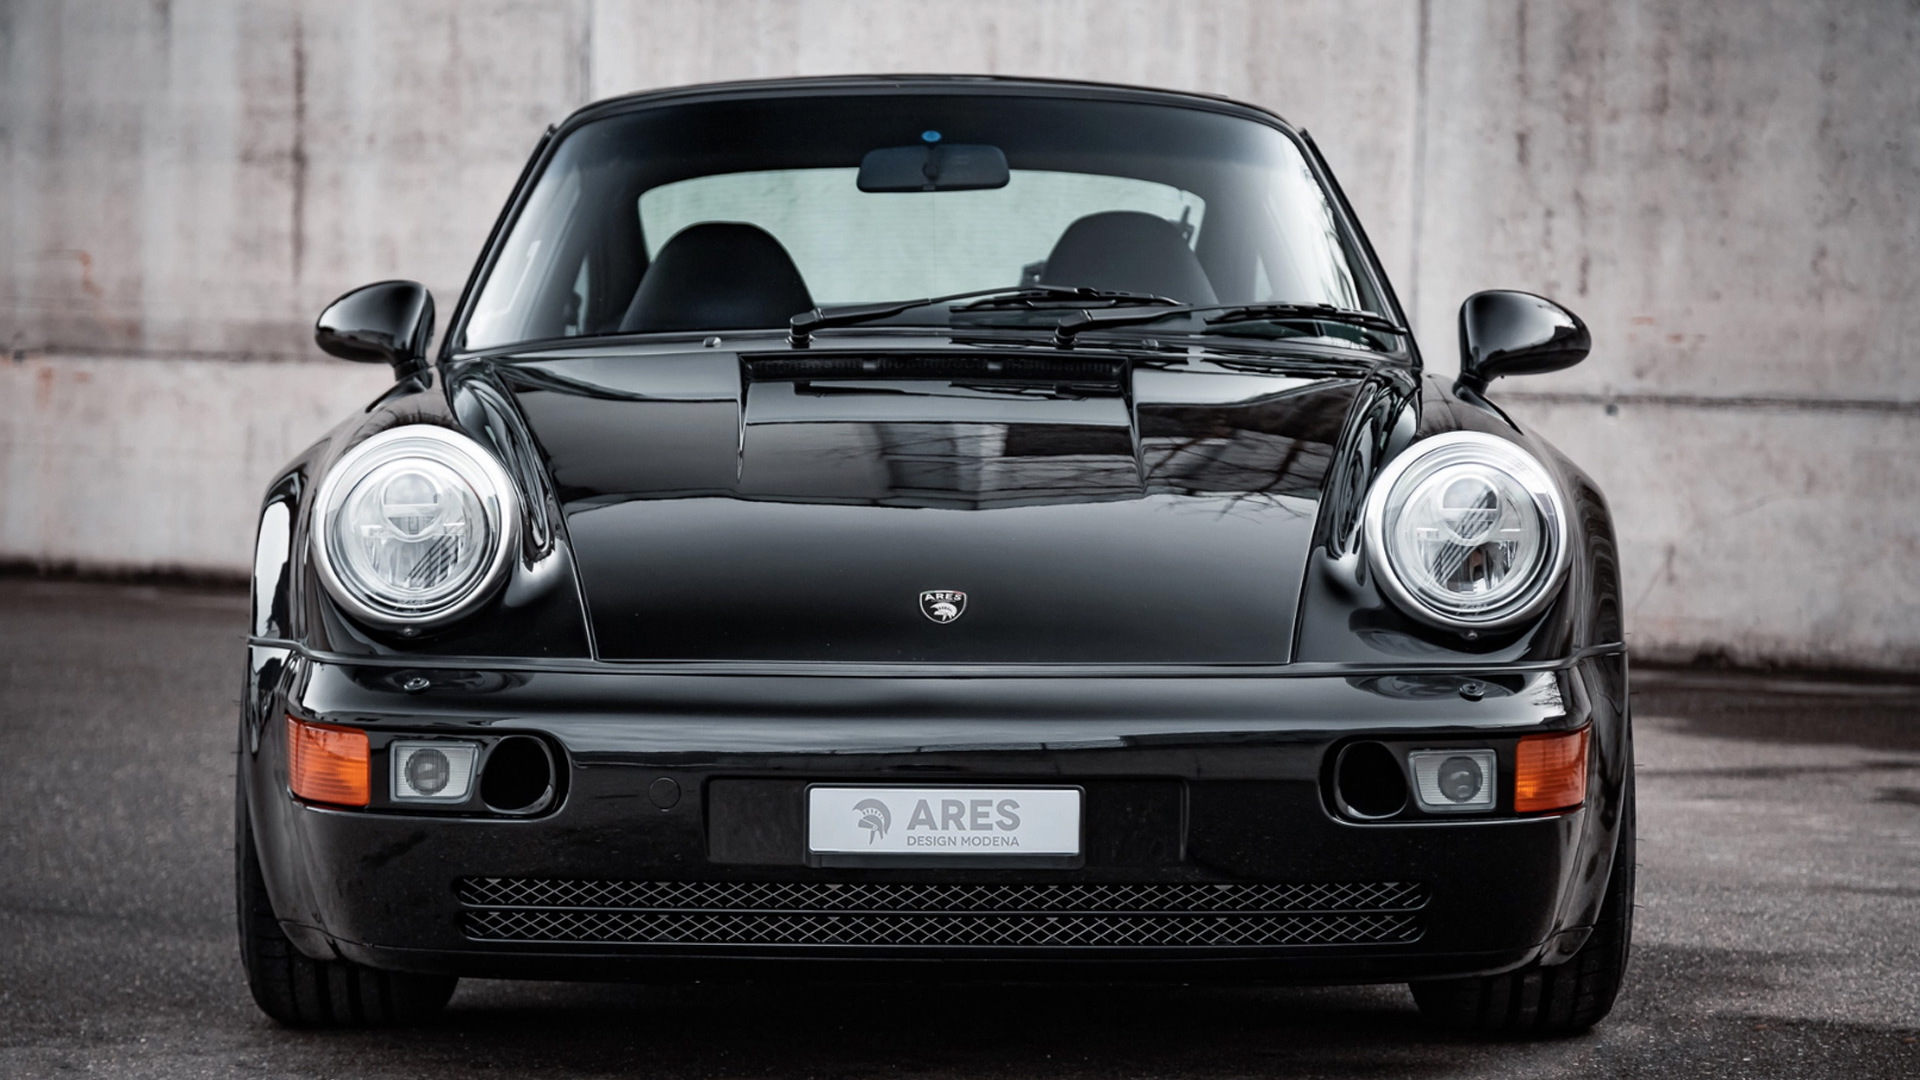 964-generation Porsche 911 Turbo by Ares